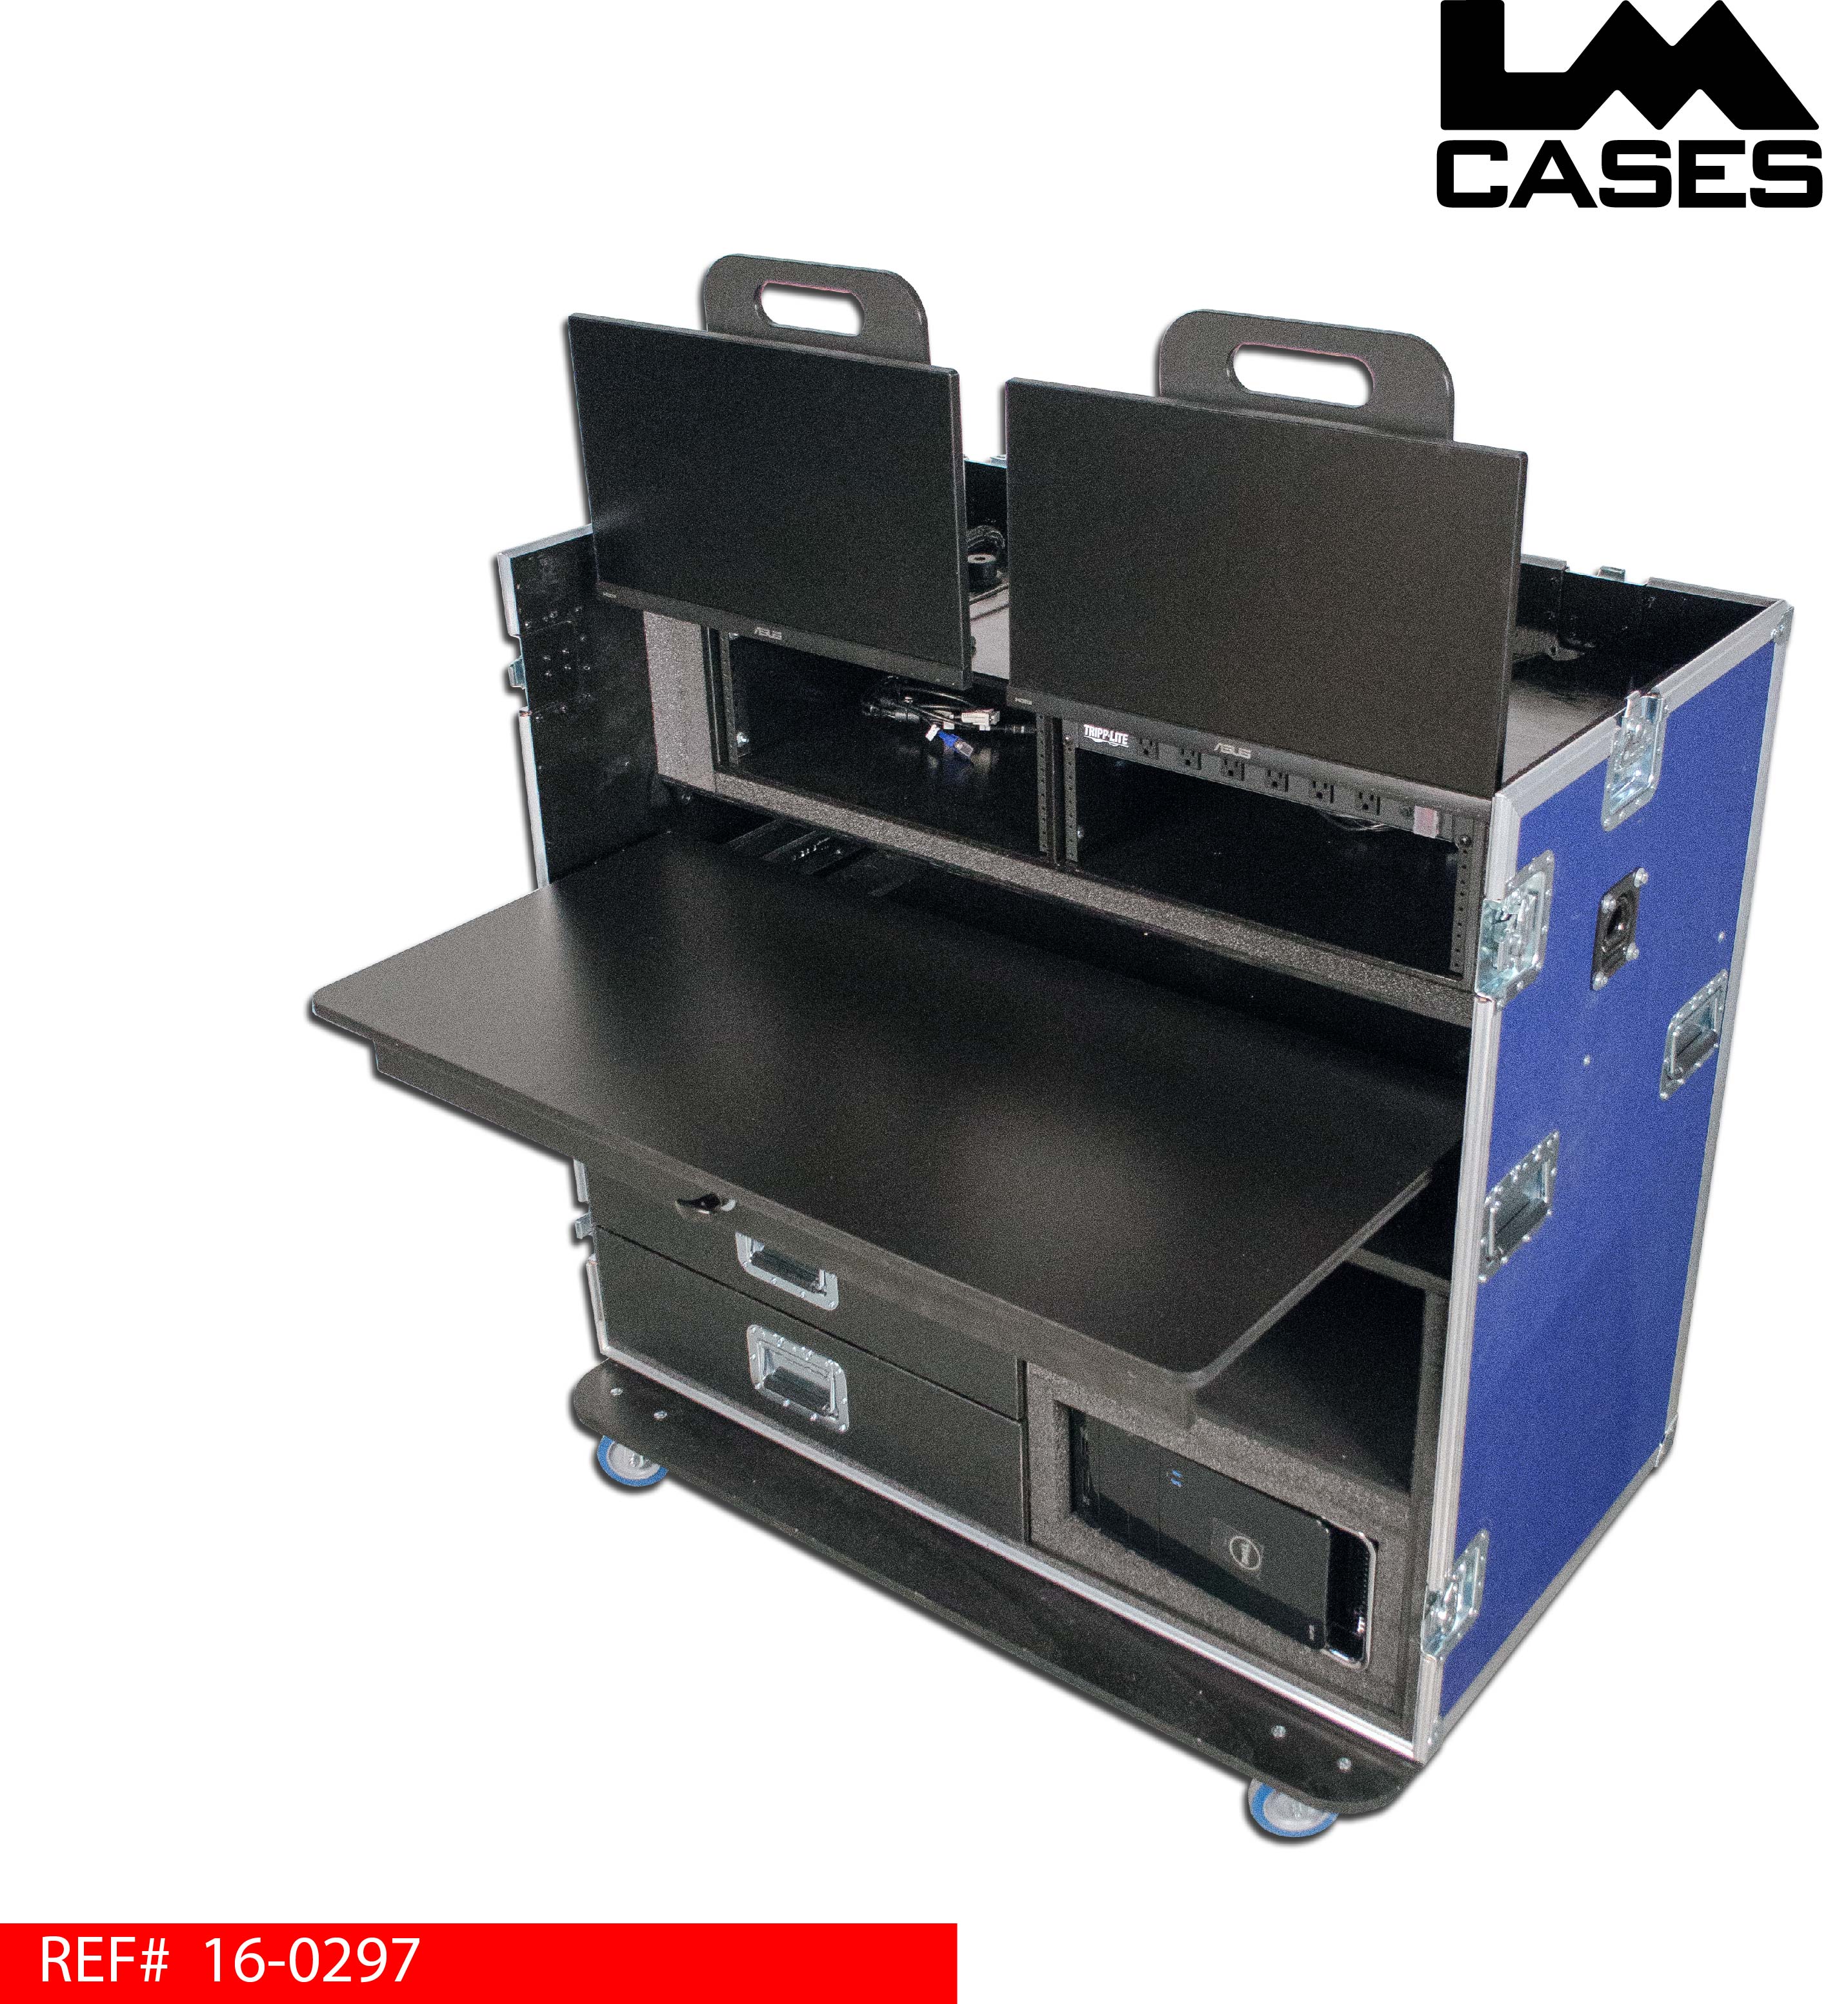 LM Cases Products